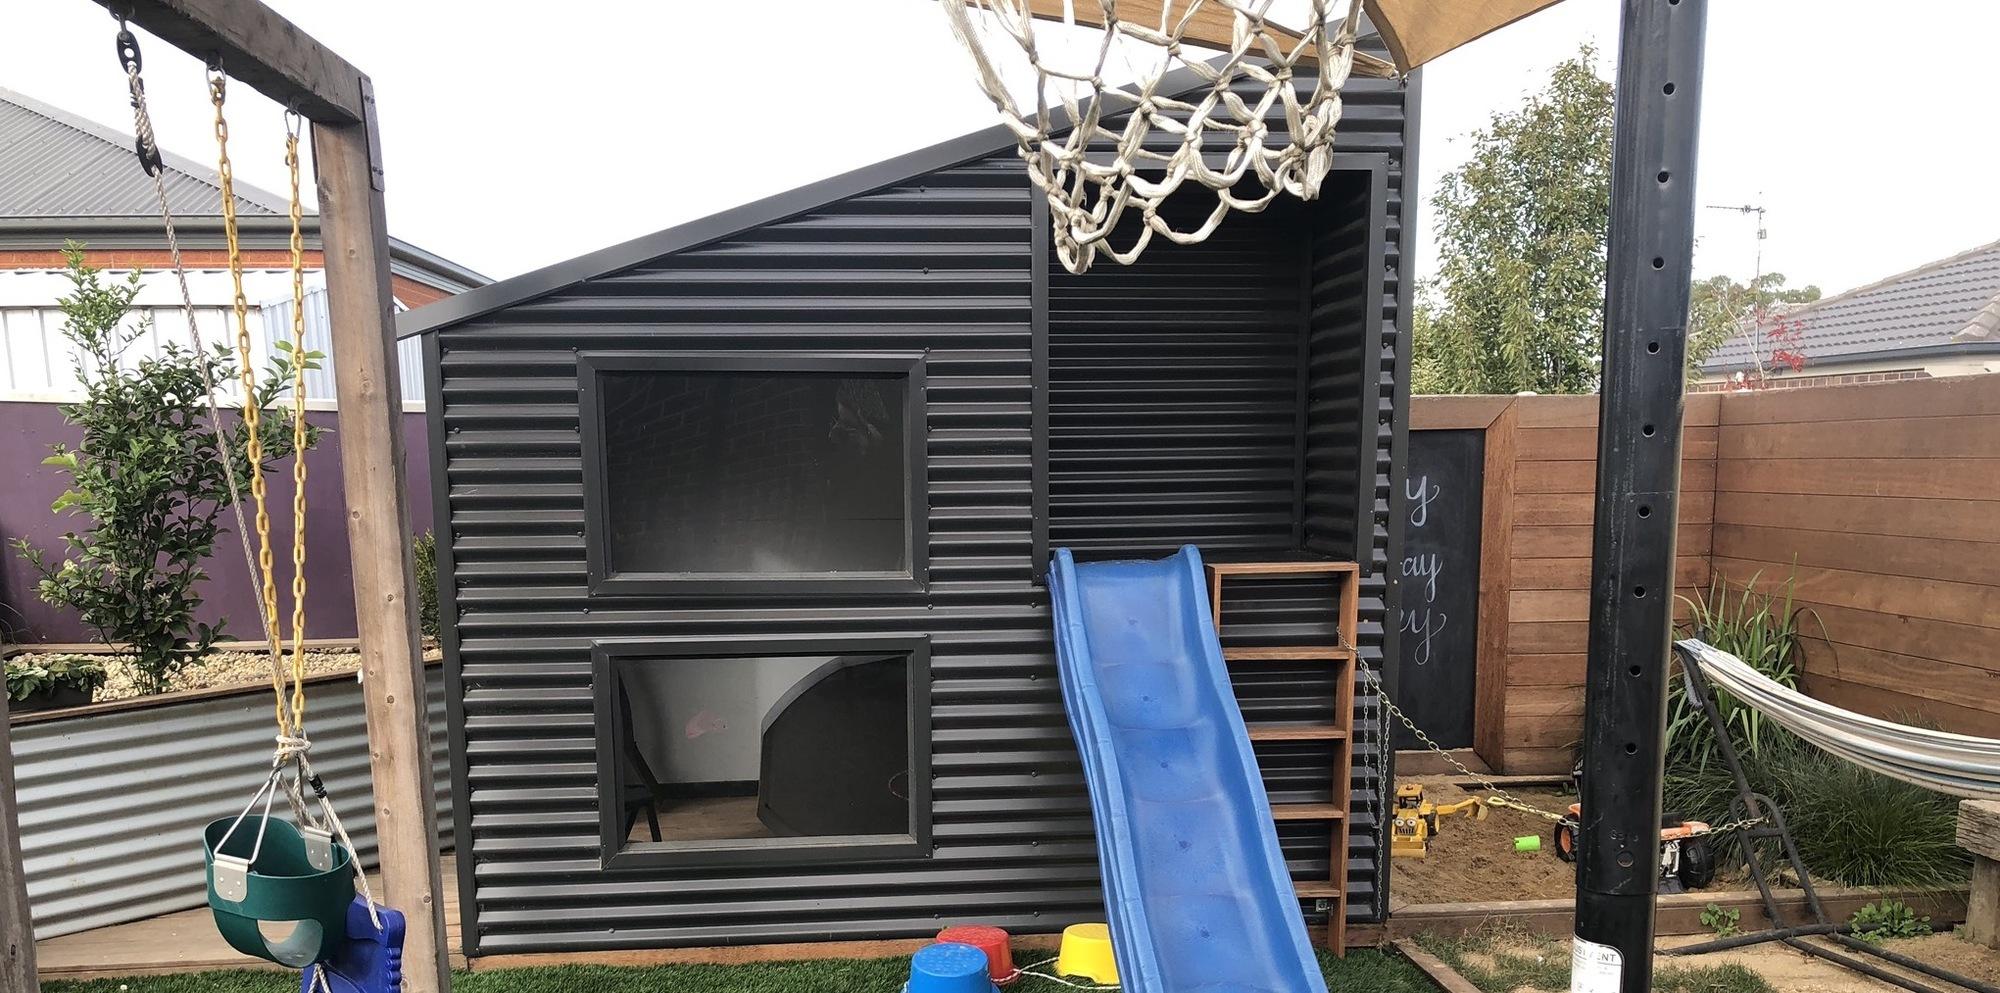 Bianca from Broadford, VIC loves COLORBOND® steel. Kids Cubby house clad in COLORBOND® steel in colour Monument®